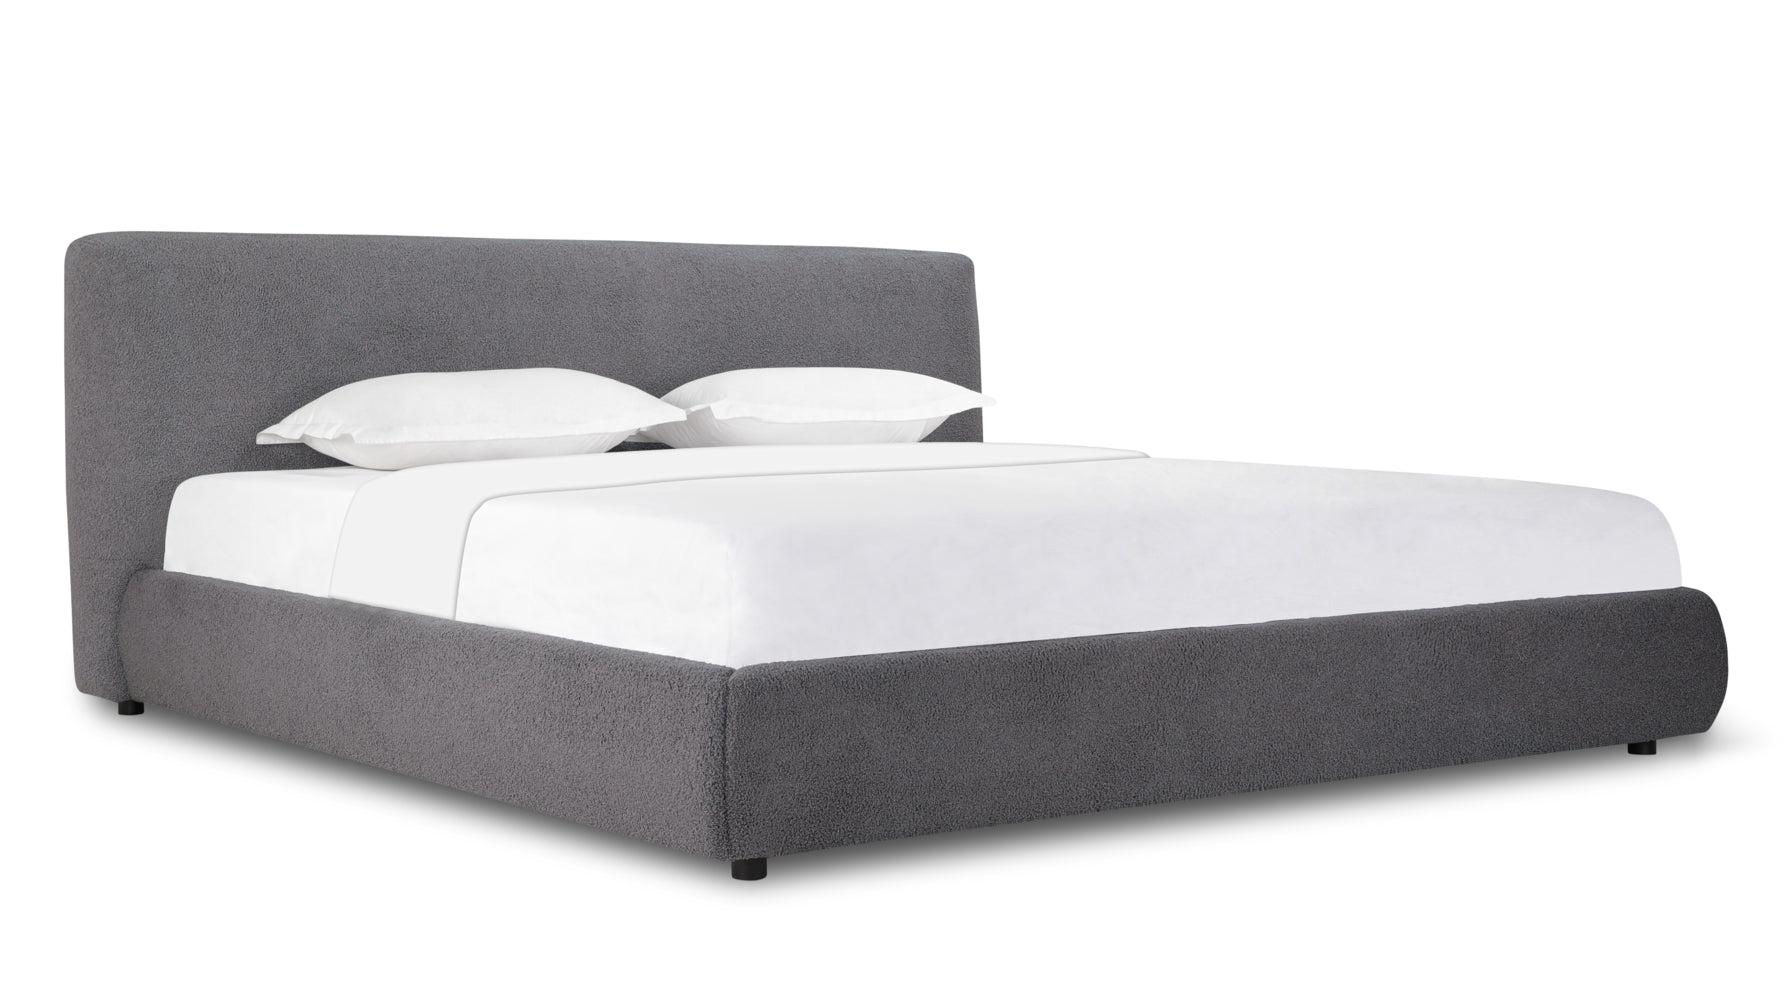 Dream Bed With Storage, King, Putty - Image 10